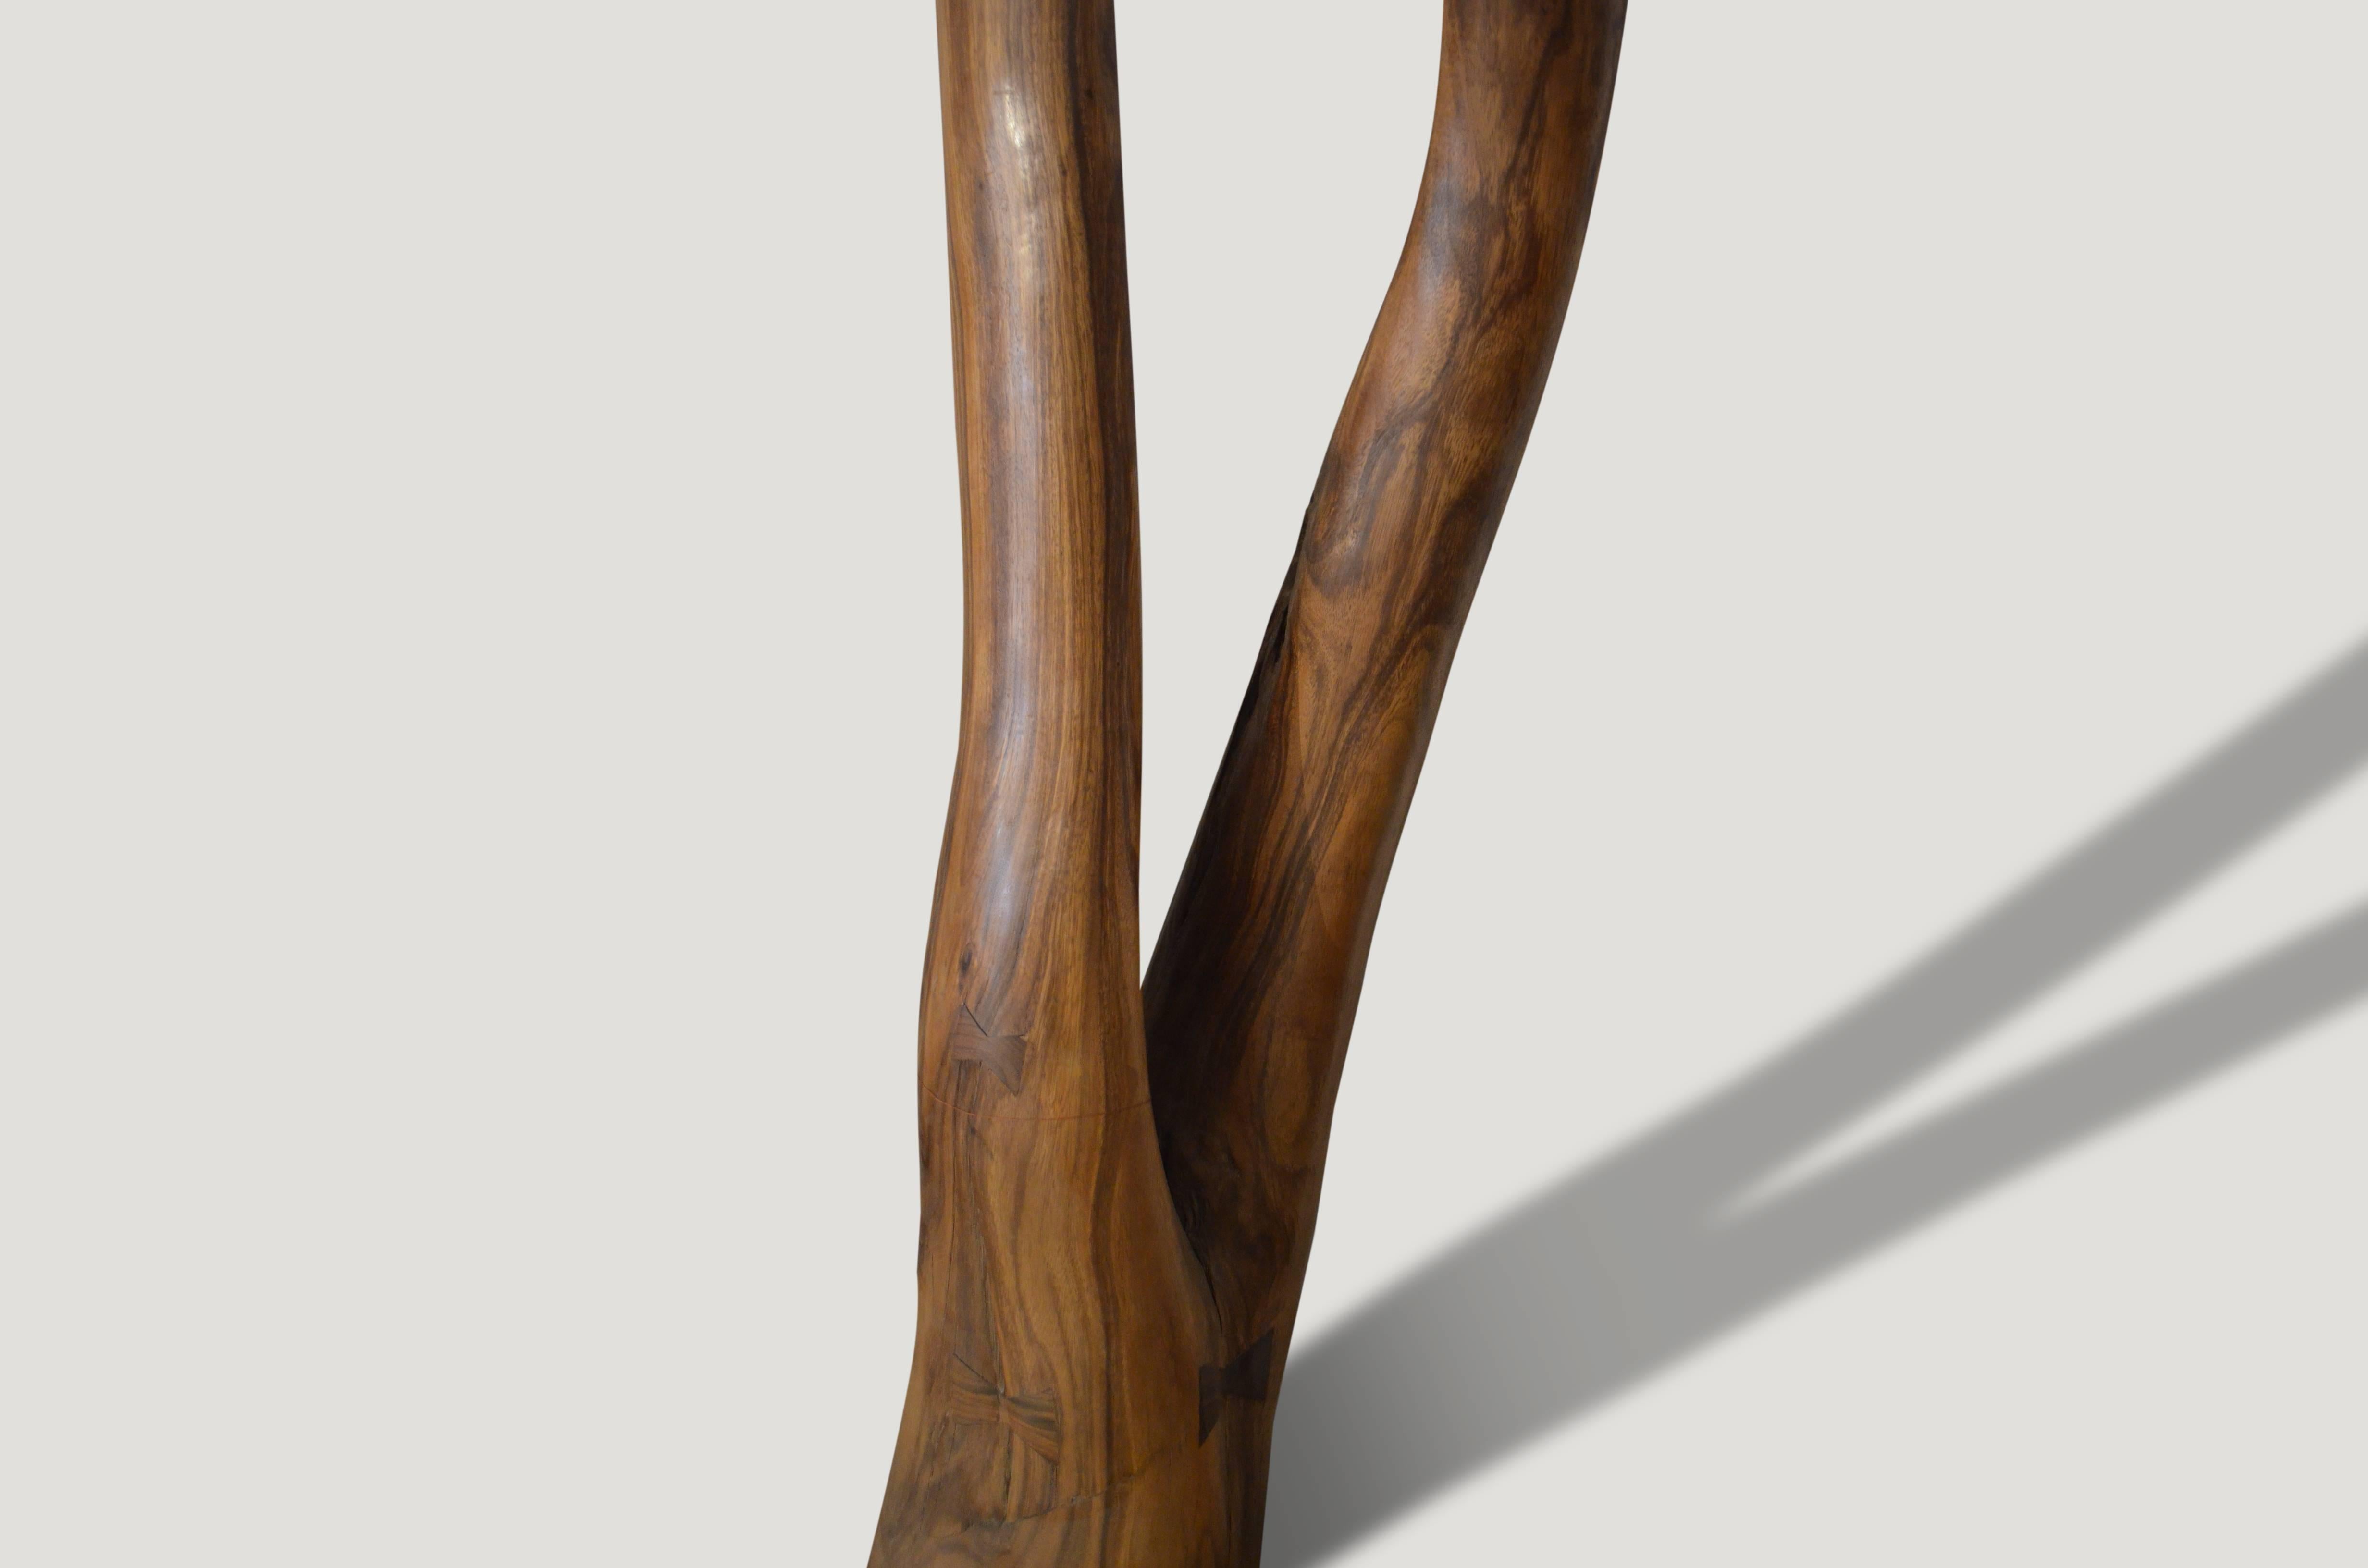 Andrianna Shamaris Girl Upside Down Suar Wood Sculpture In Excellent Condition For Sale In New York, NY